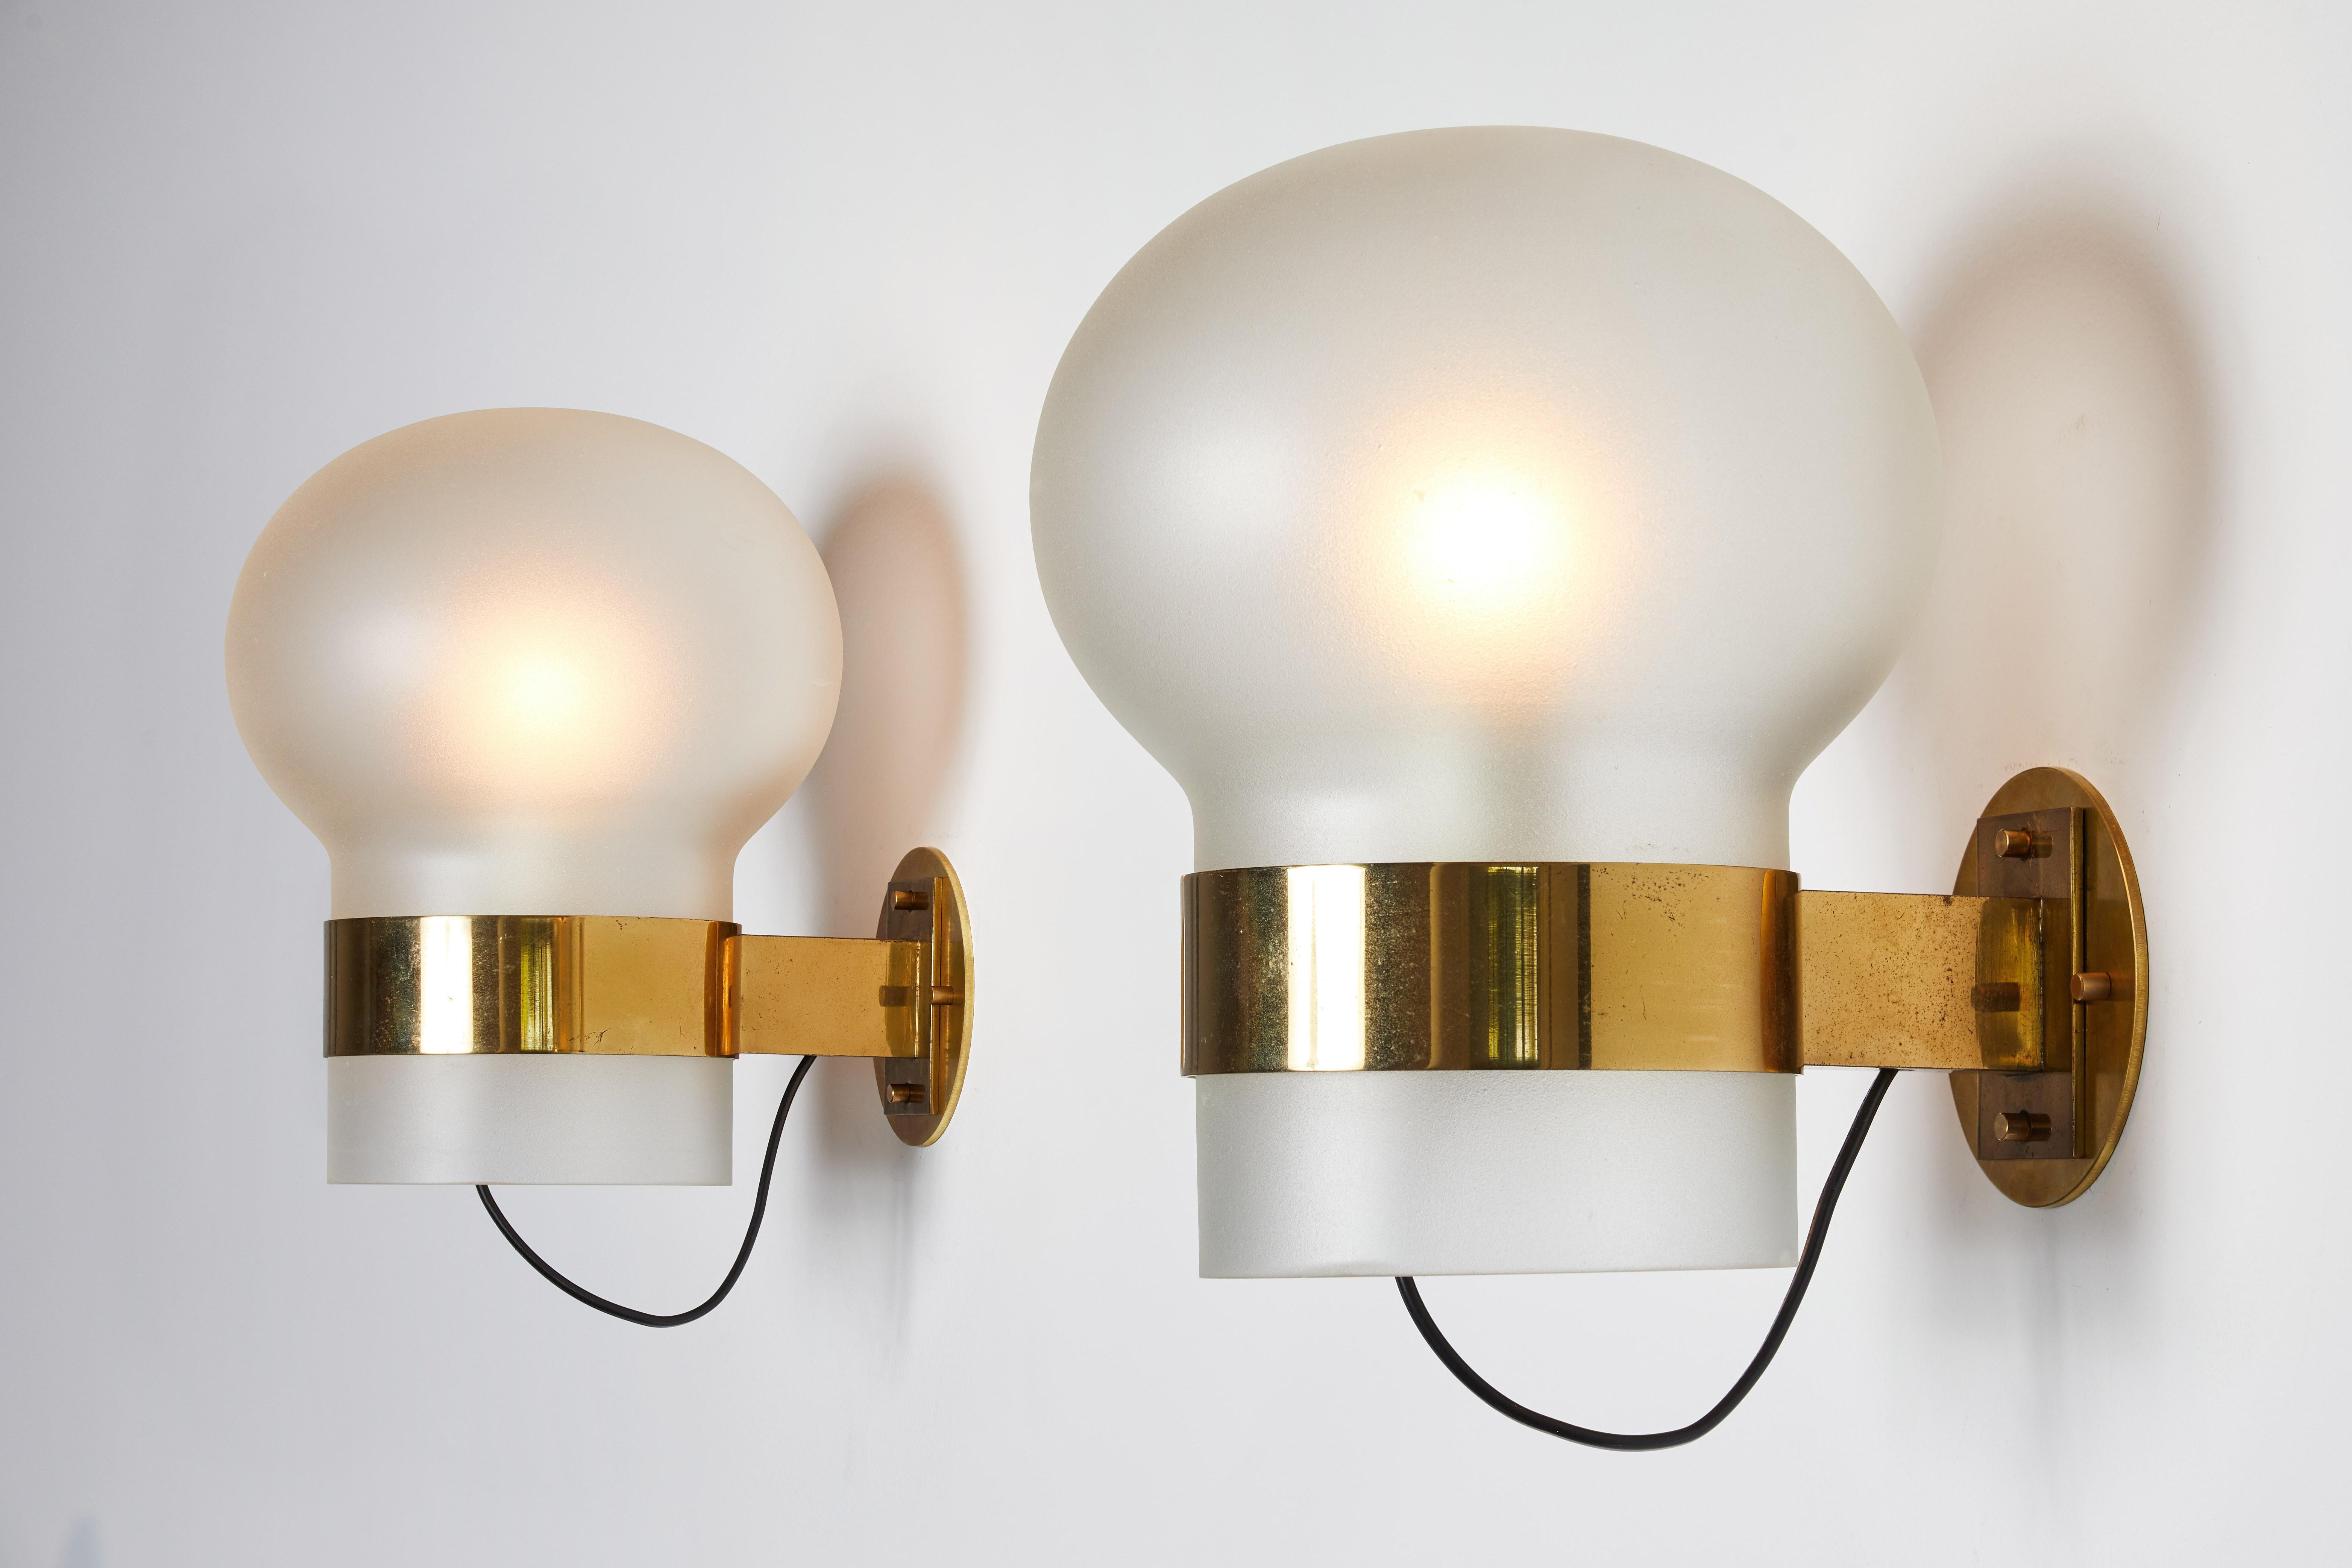 Pair of Model 2404 Sconces by Fontana Arte. Designed and manufactured in Italy, circa 1950s. Rewired for U.S. junction boxes. Frosted textured opaline glass globe with brass hardware. Custom backplates. Each globe takes one E27 60w maximum globe.